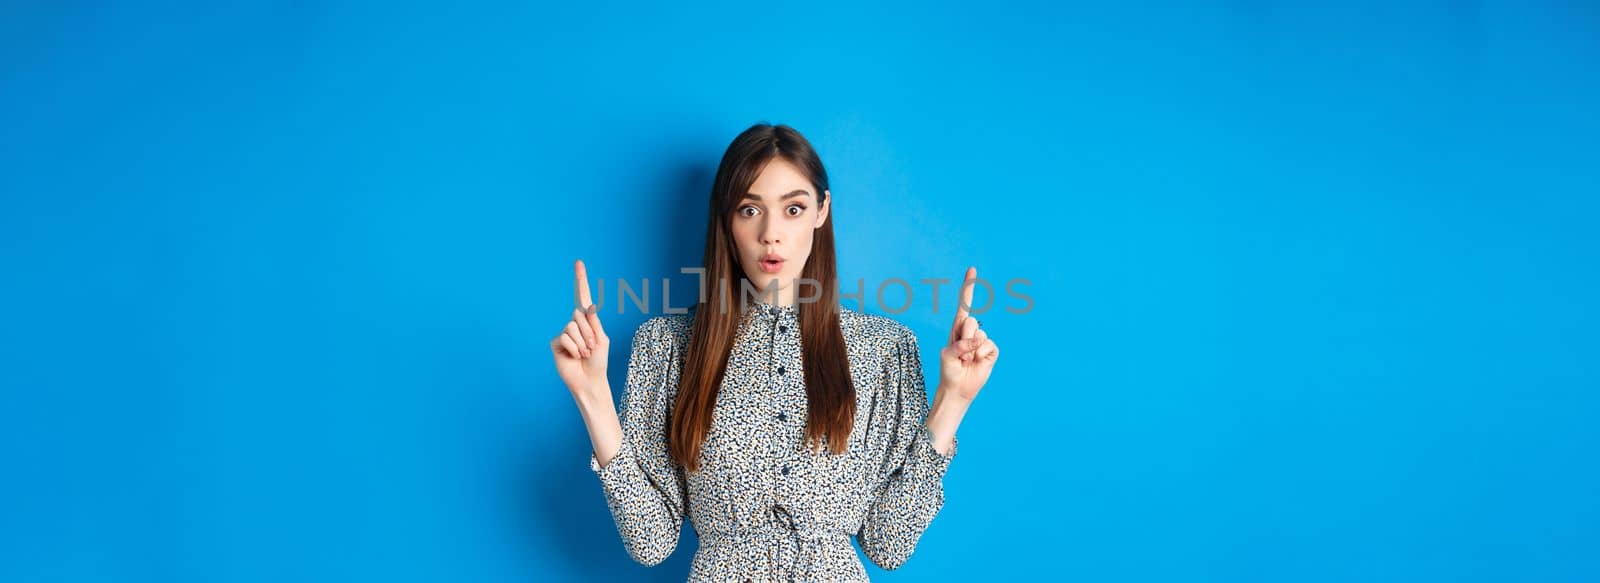 Excited pretty lady in dress say wow, looking intrigued by advertisement, pointing fingers up at logo, standing against blue background.